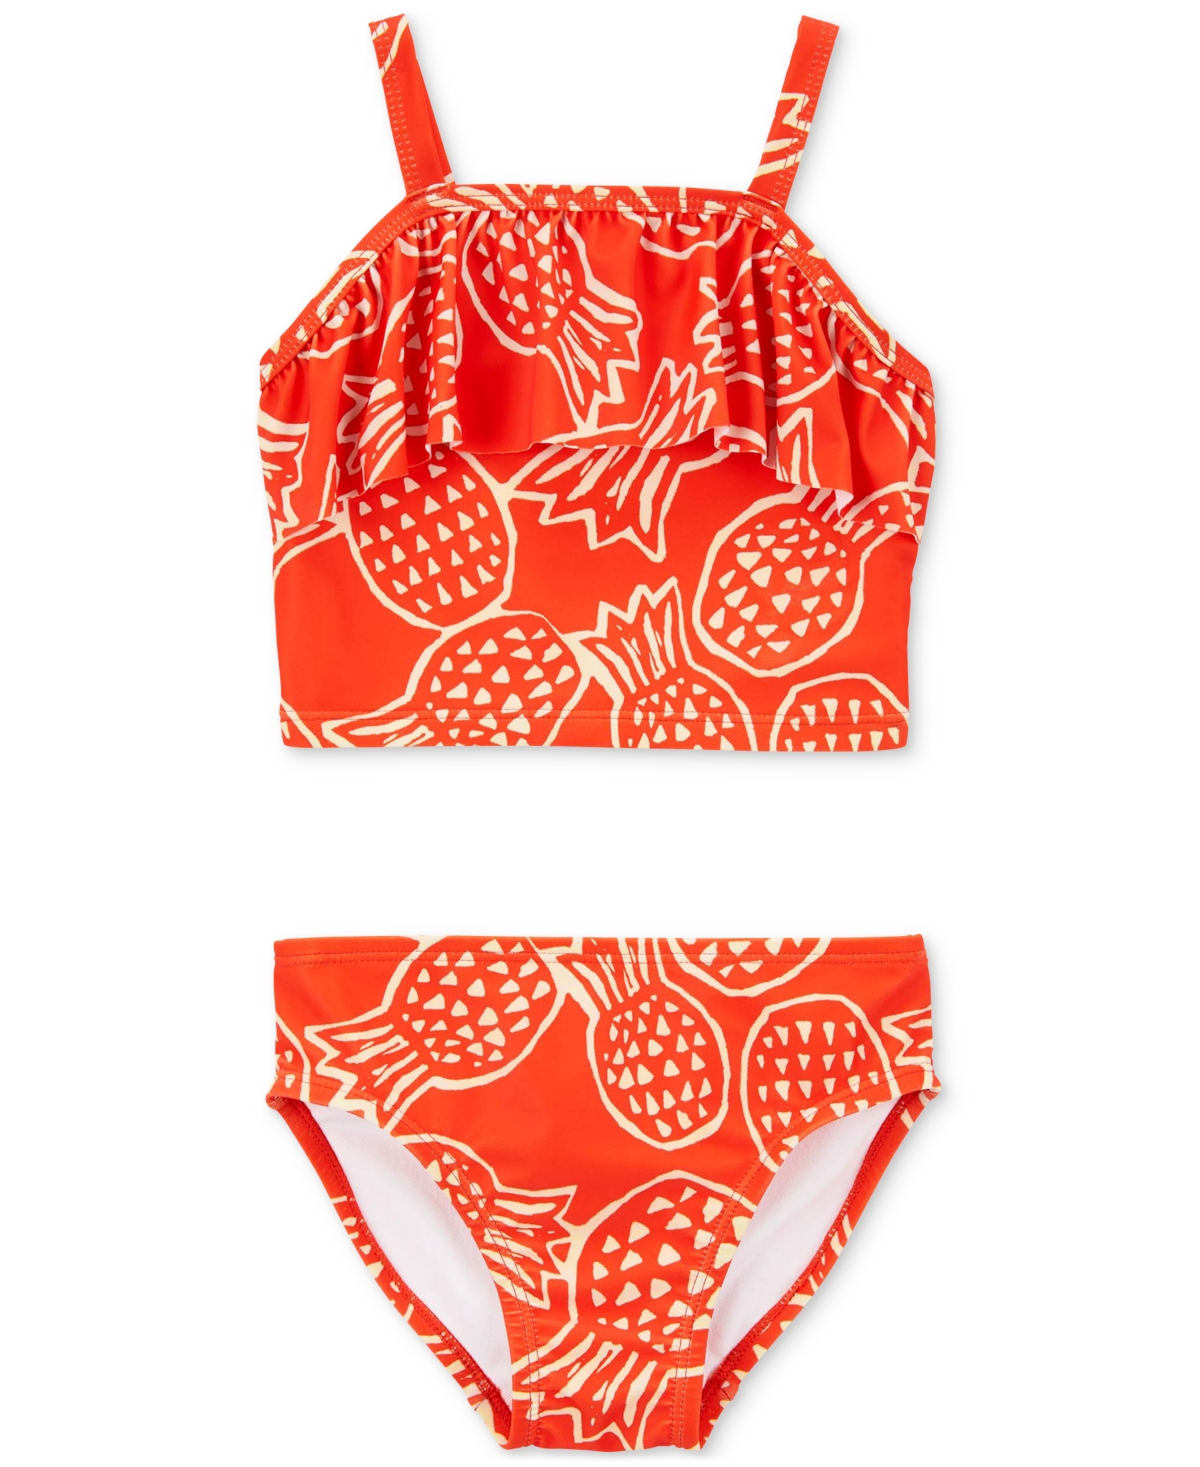 Carter's Babies' Toddler Girls Pineapple-print Tankini Swimsuit, 2 Piece Set In Assorted